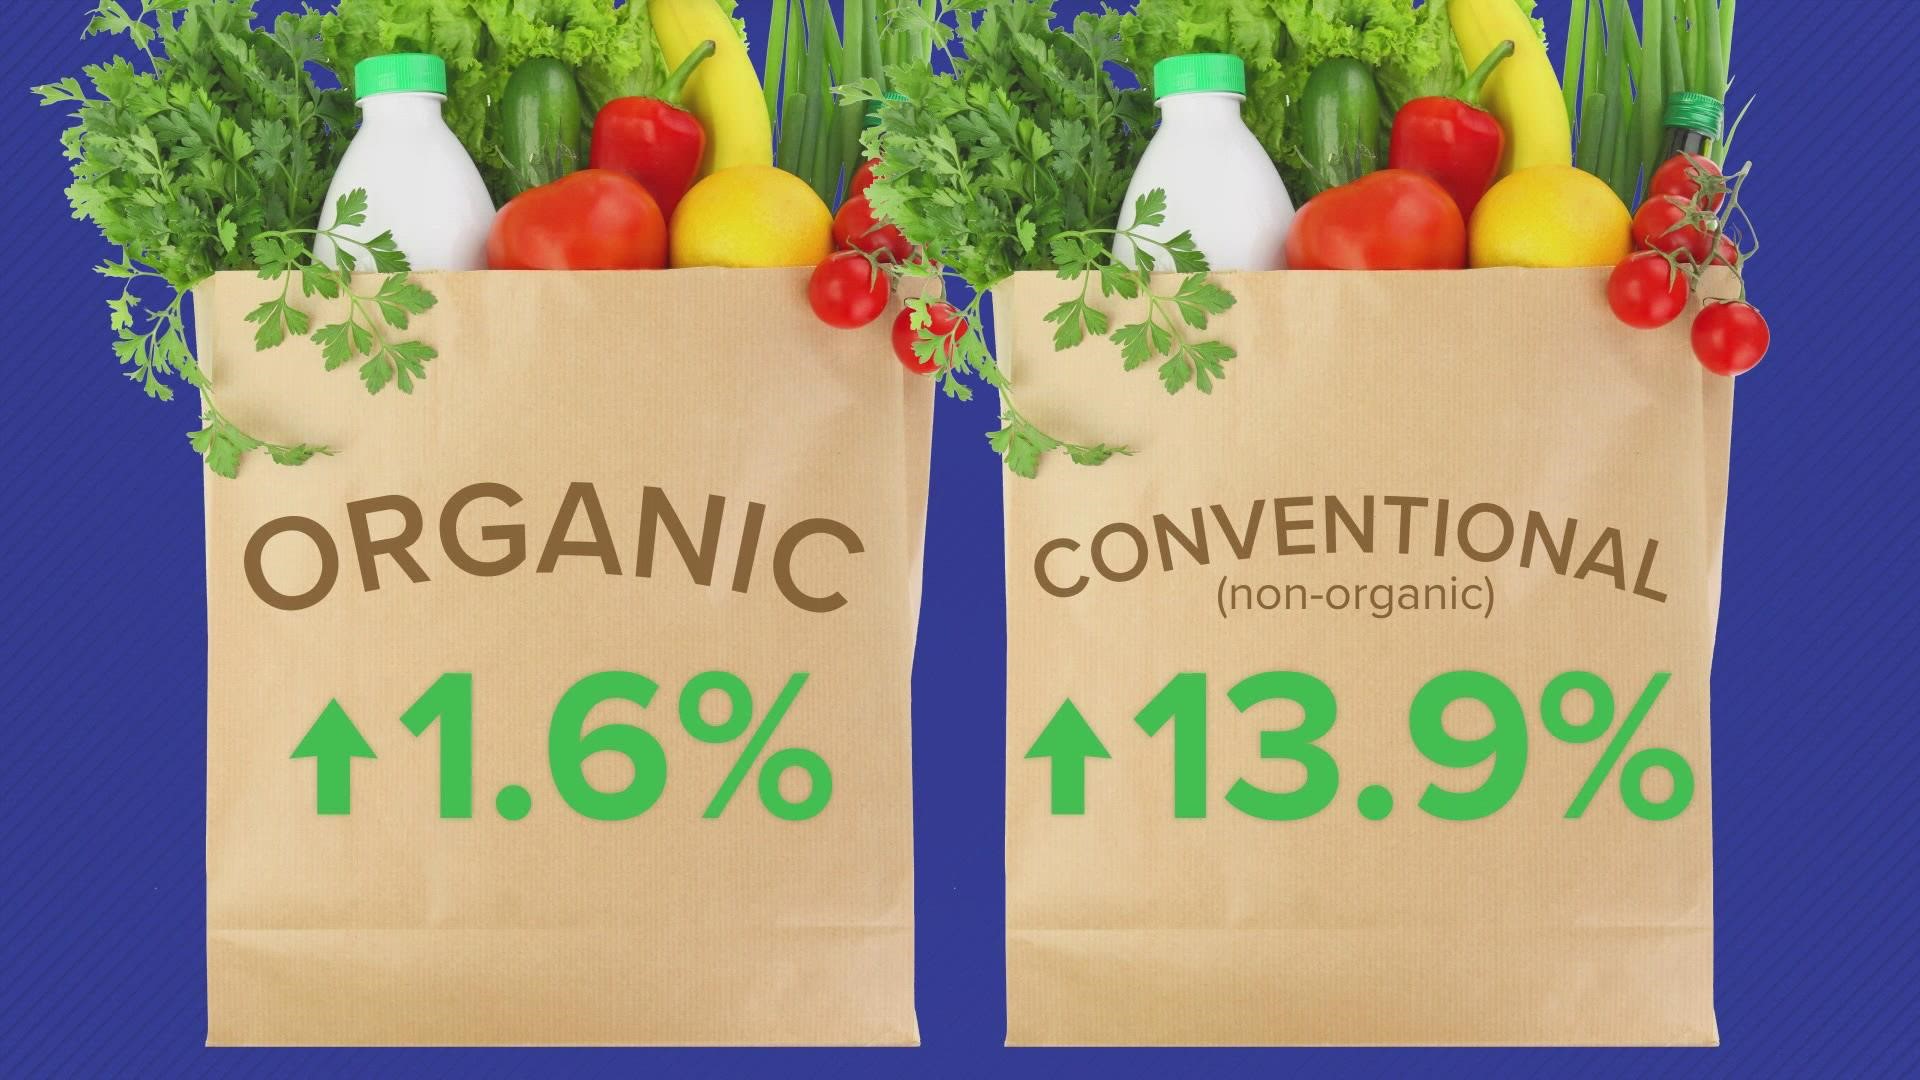 Prices for organic goods are usually much higher than what you pay for non-organic. But the price gap between the two may be shrinking.